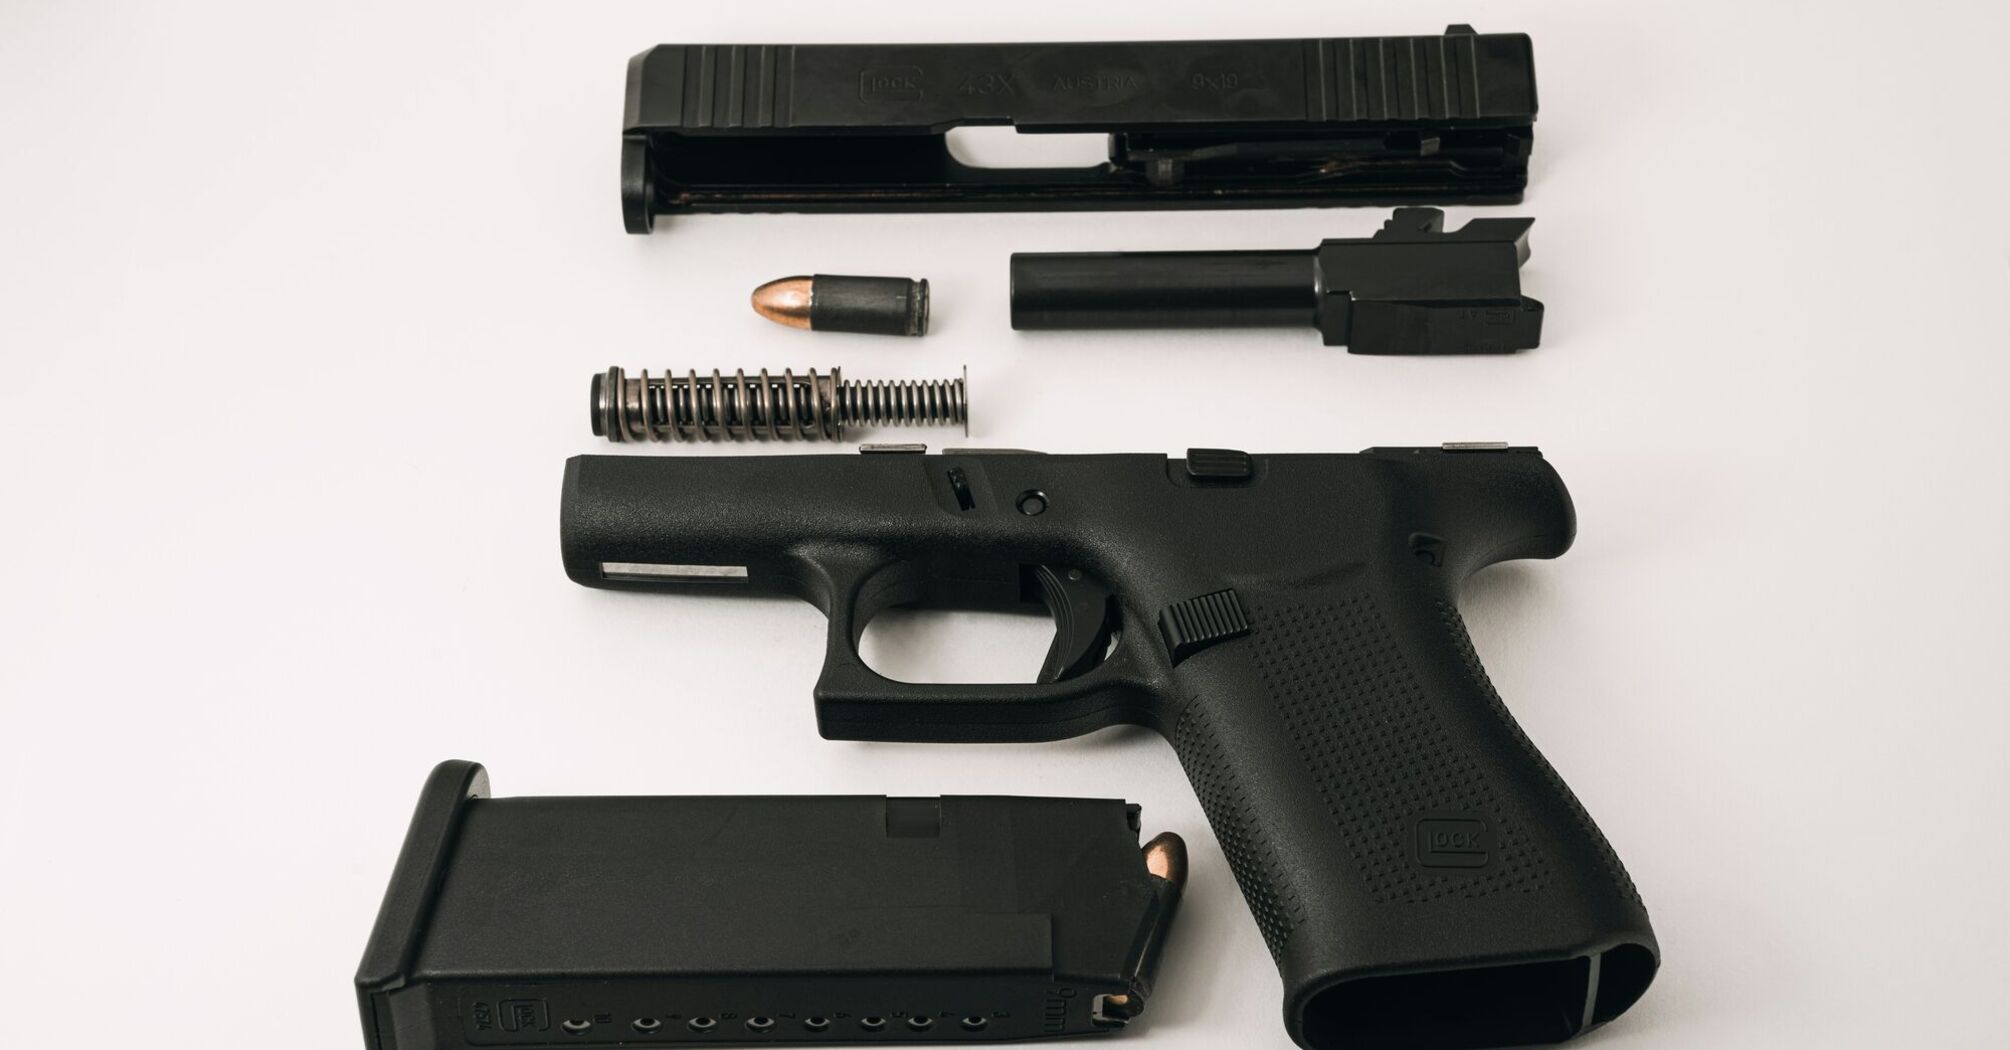 Disassembled black 9mm handgun with parts laid out including the magazine, bullets, slide, and barrel